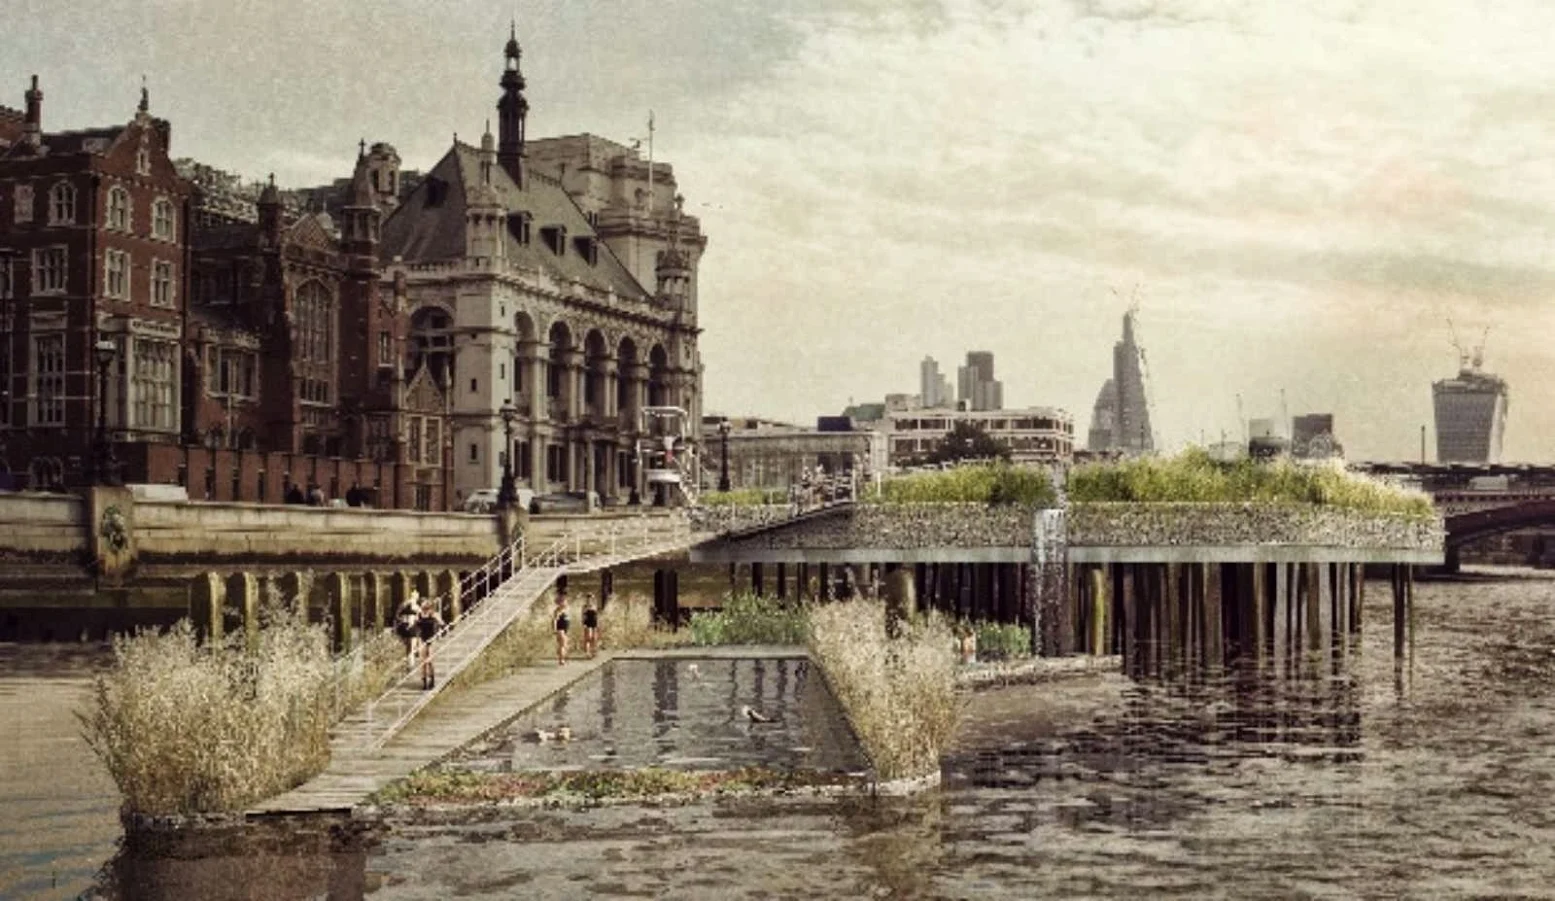 05-London-As-It-Could-Be-Now:-New-Visions-for-the-Thames